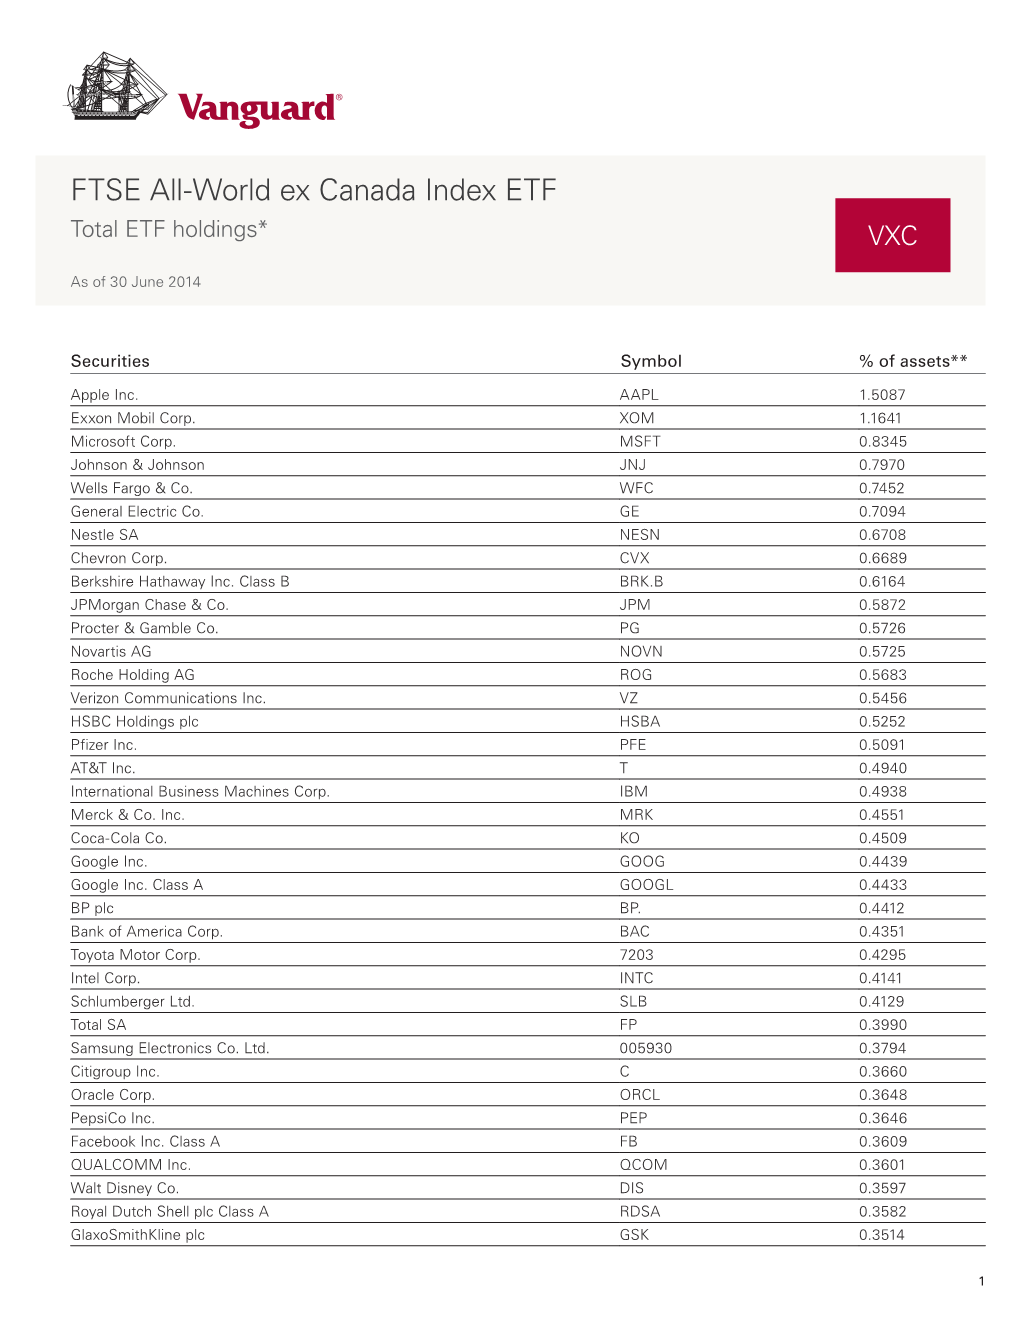 FTSE All-World Ex Canada Index ETF Total ETF Holdings* VXC